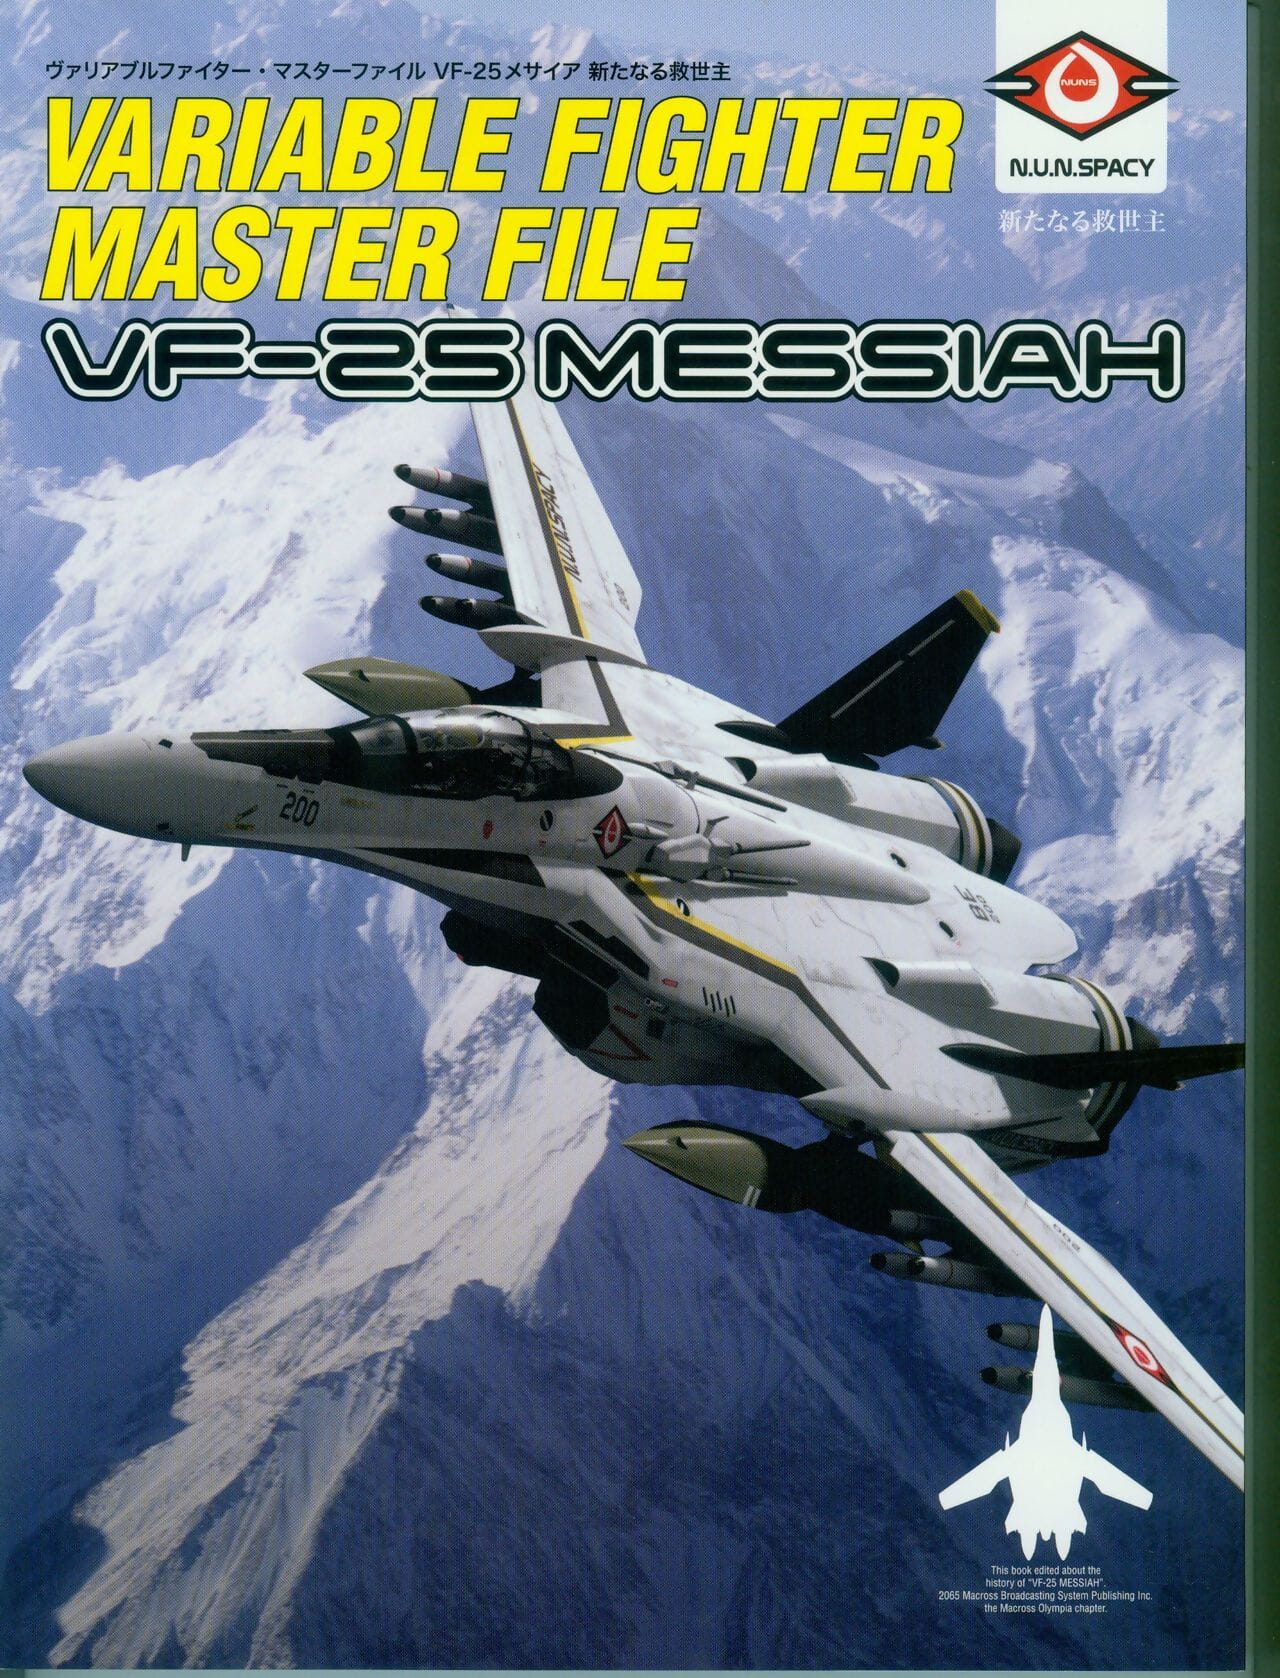 Flighty Boxer Well-skilled Spread round VF-25 Messiah